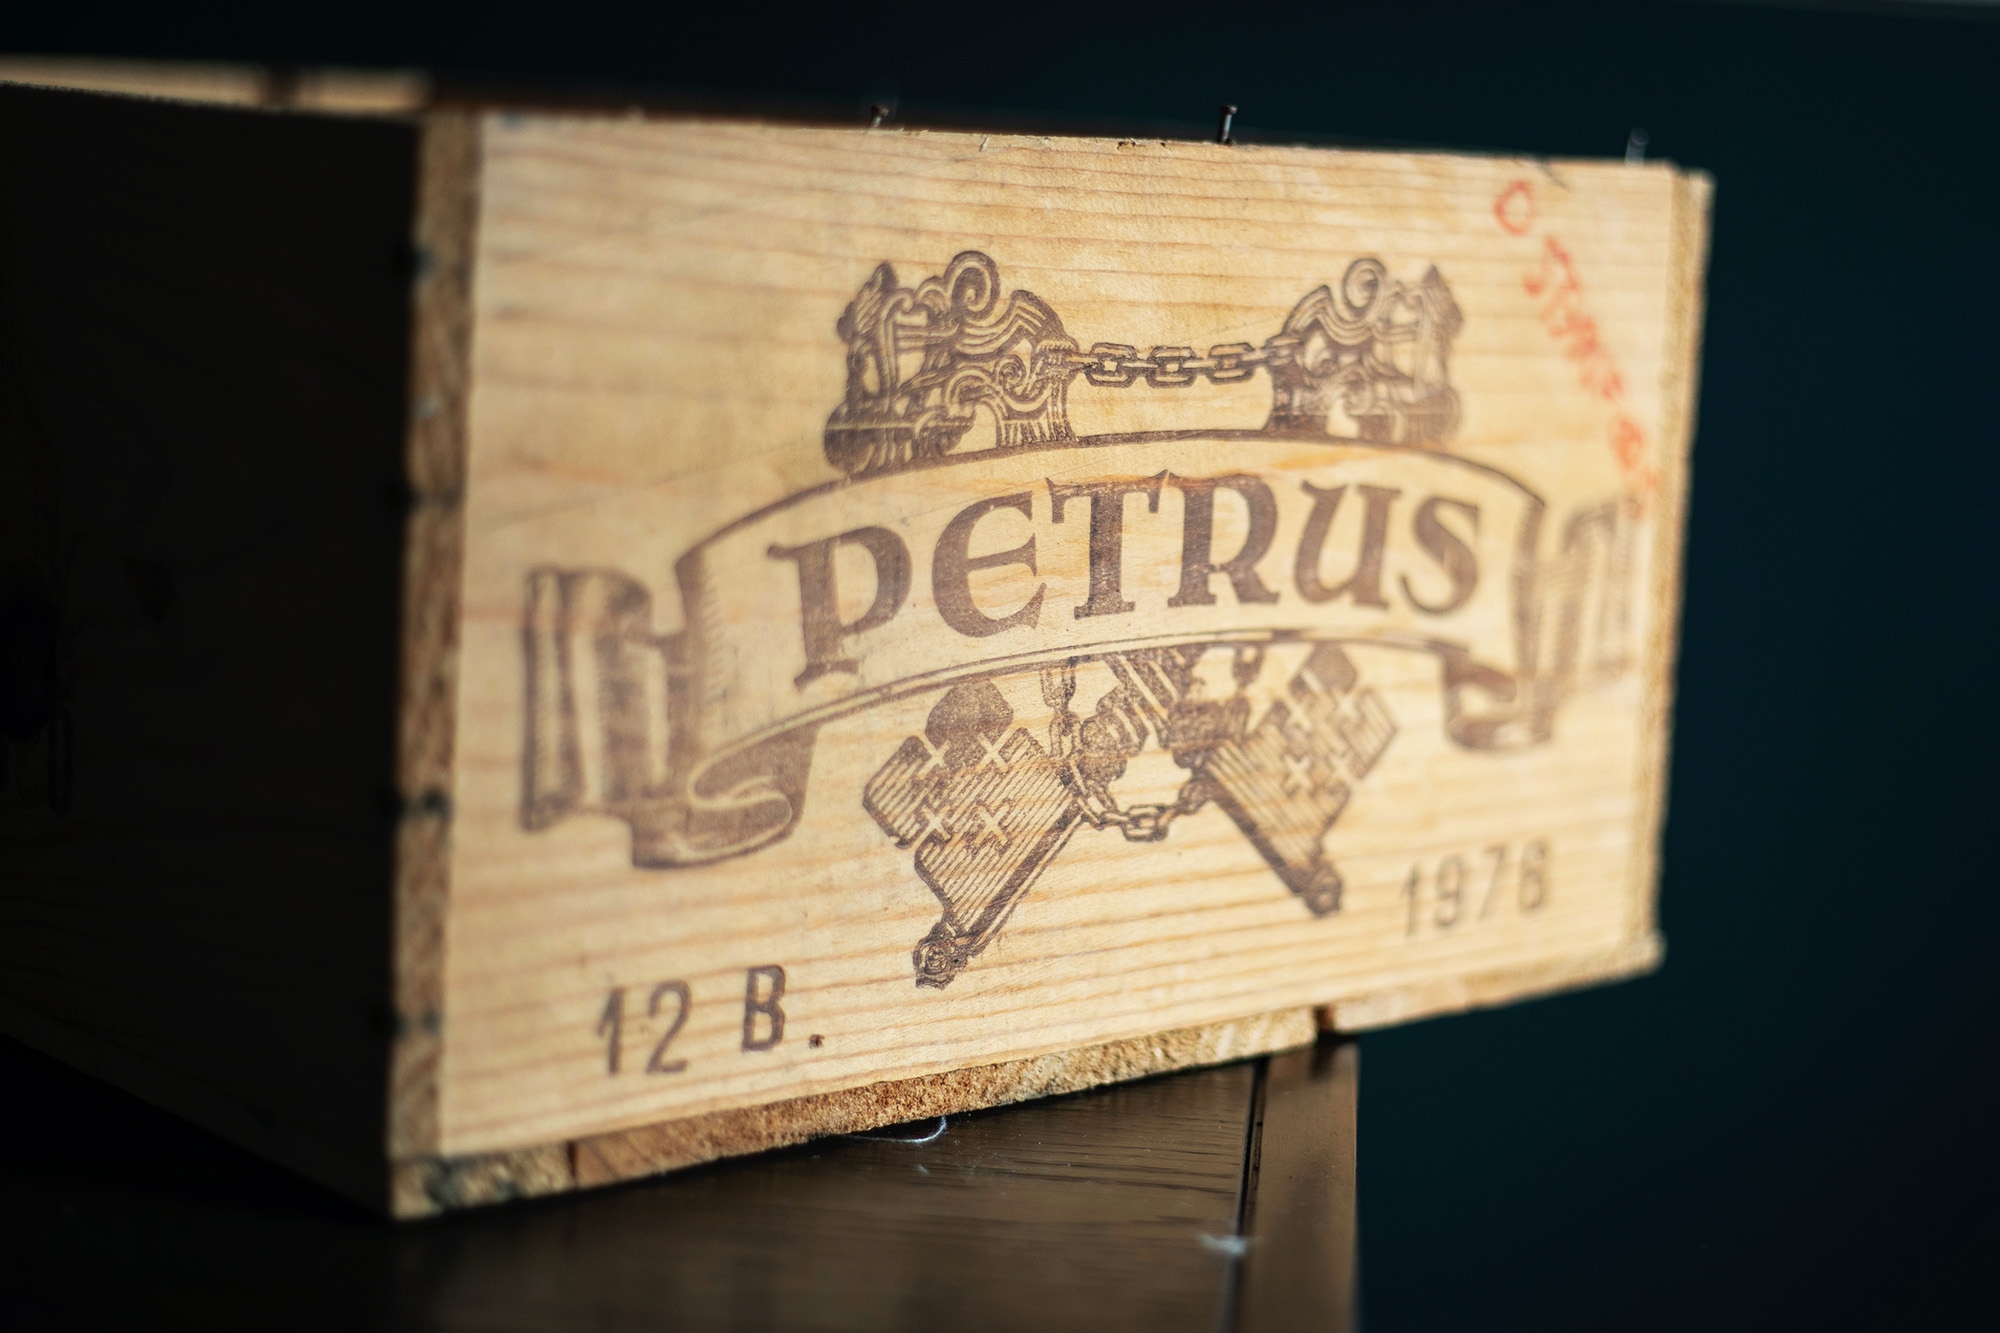 Petrus Yacht Delivery